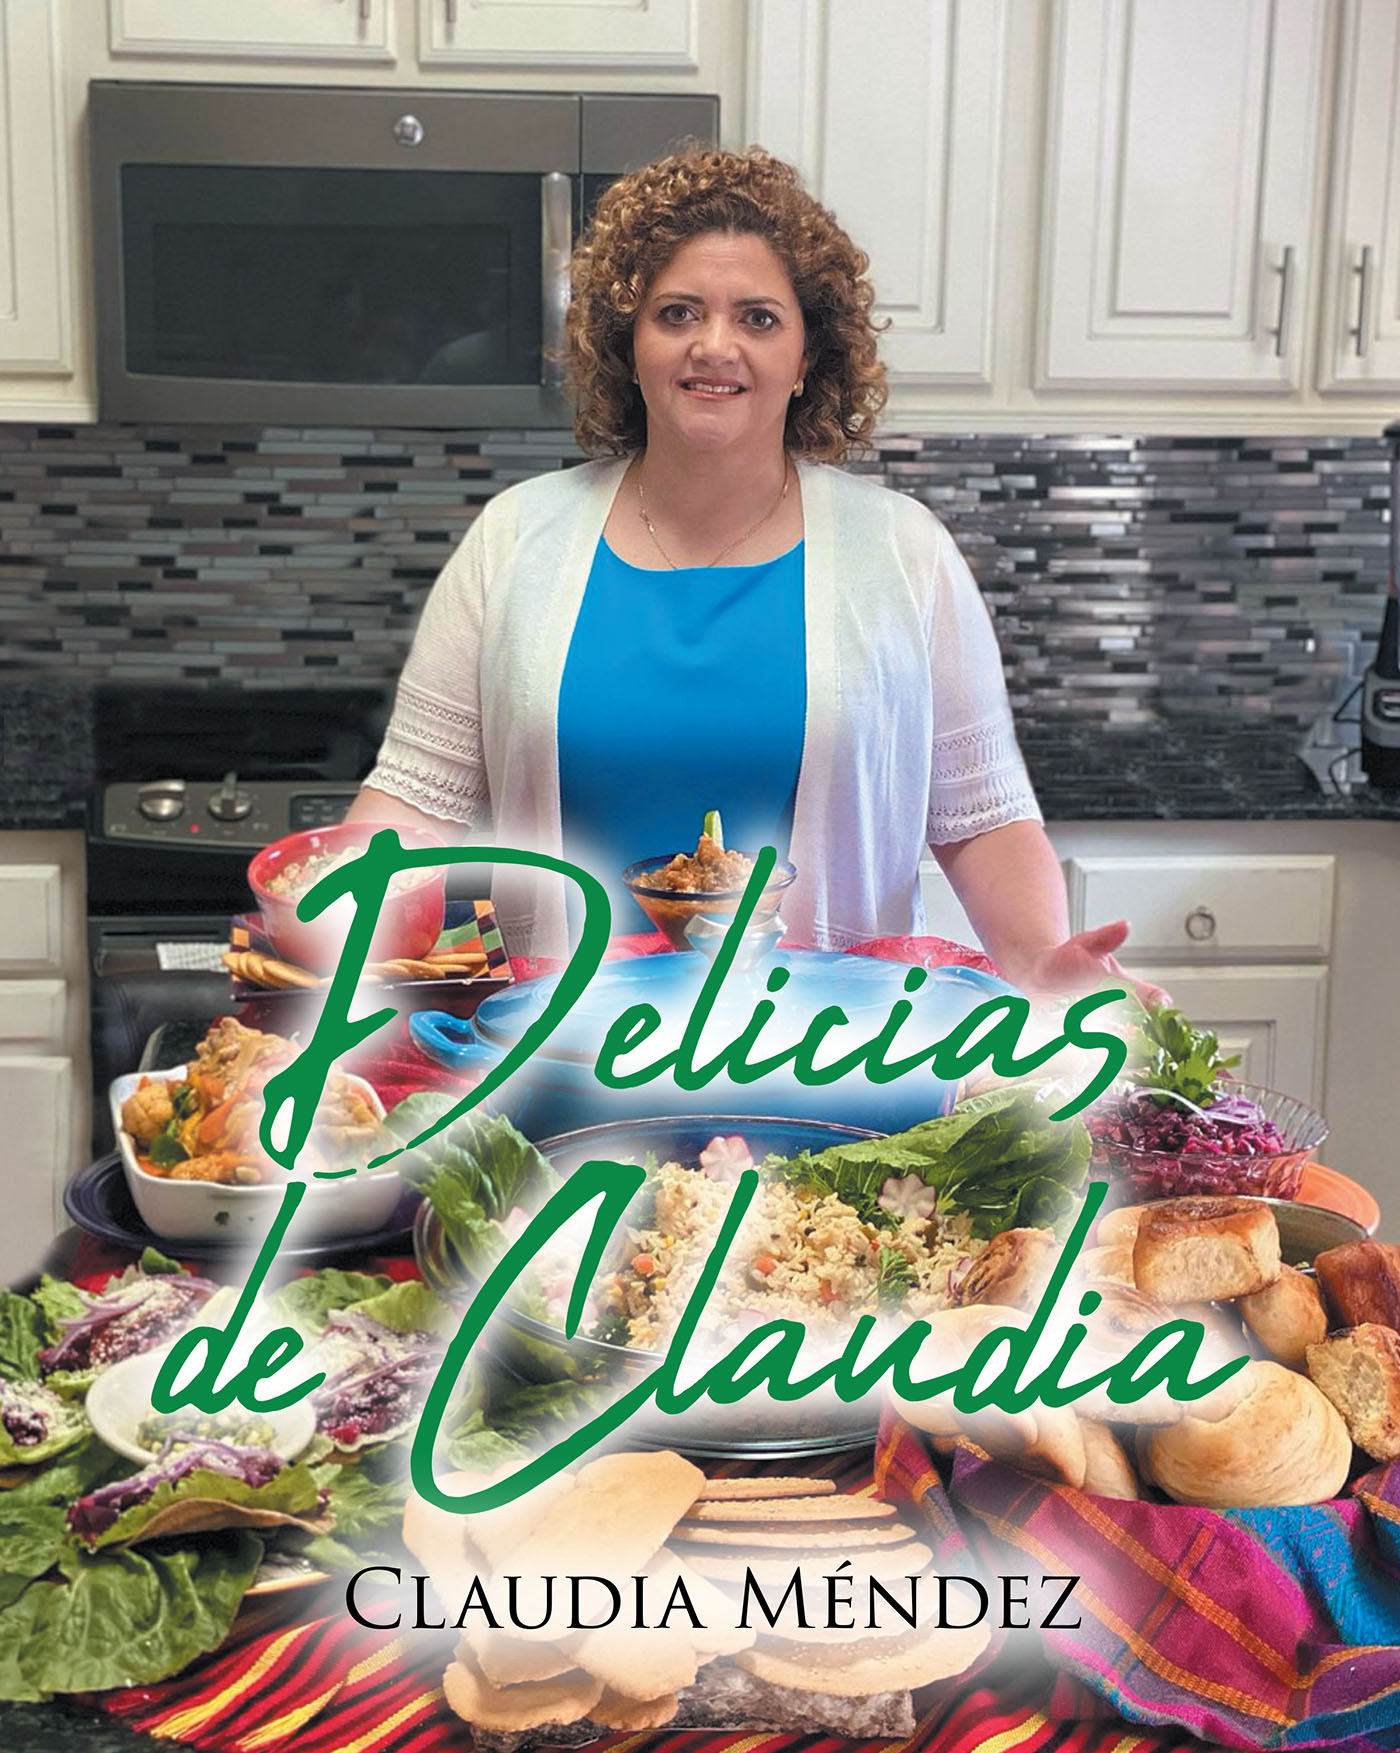 Claudia Méndez’s New Book, "Las Delicias De Claudia," is a Beautiful Collection of Recipes Perfect for Every Occasion